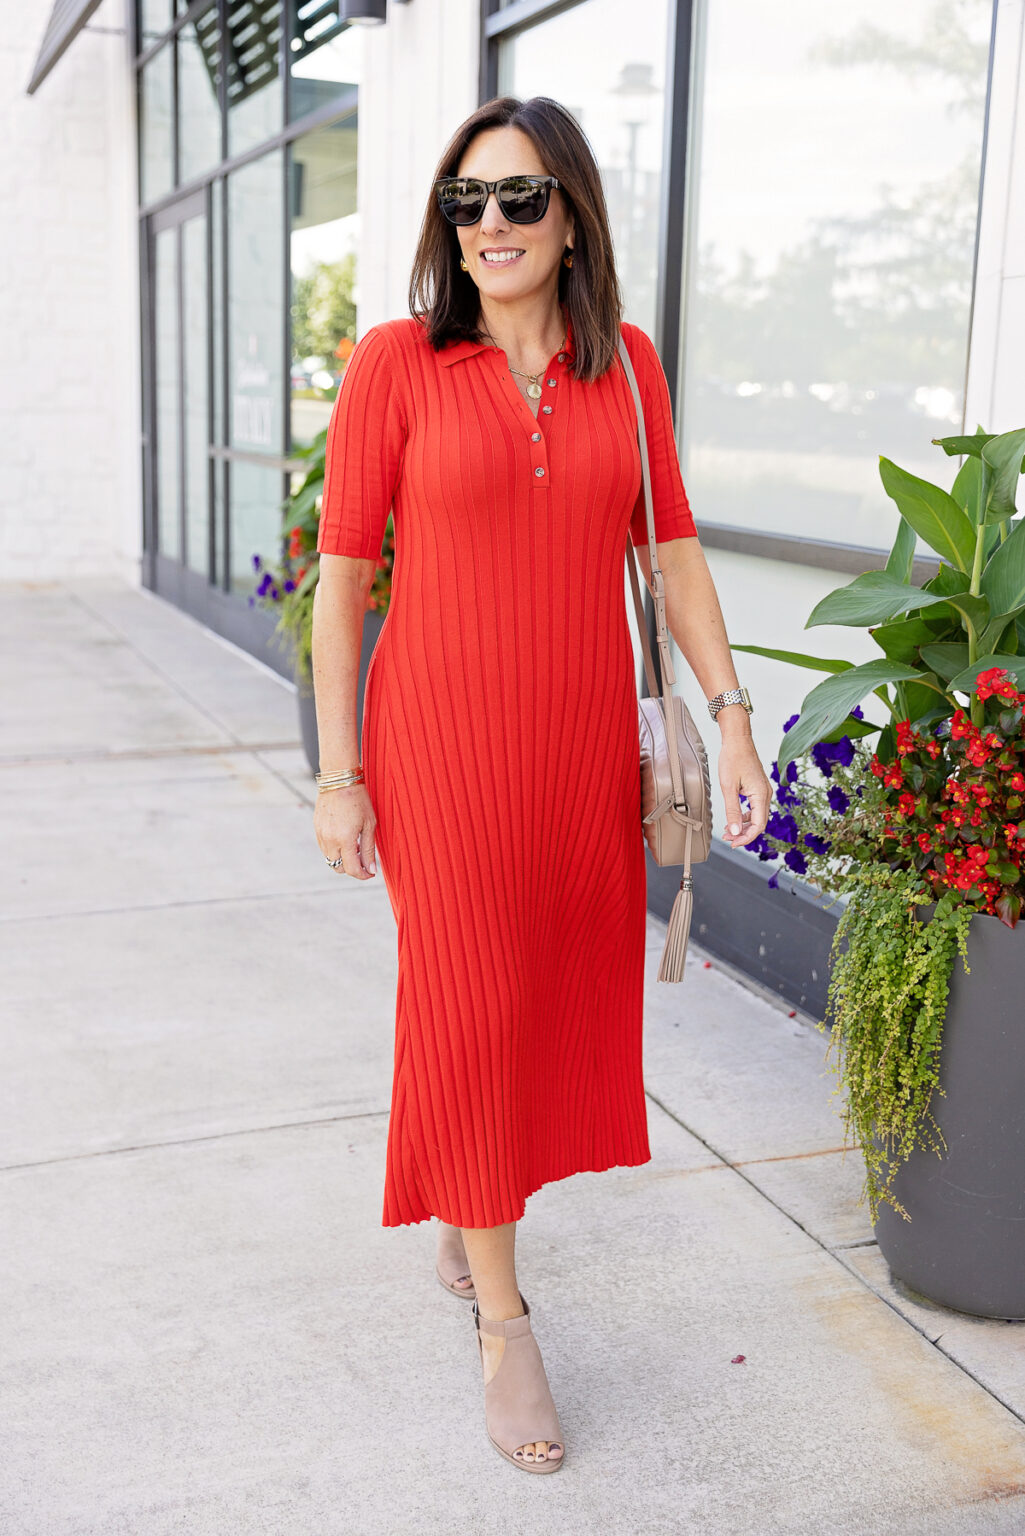 Fall Color Trend to Try: Red